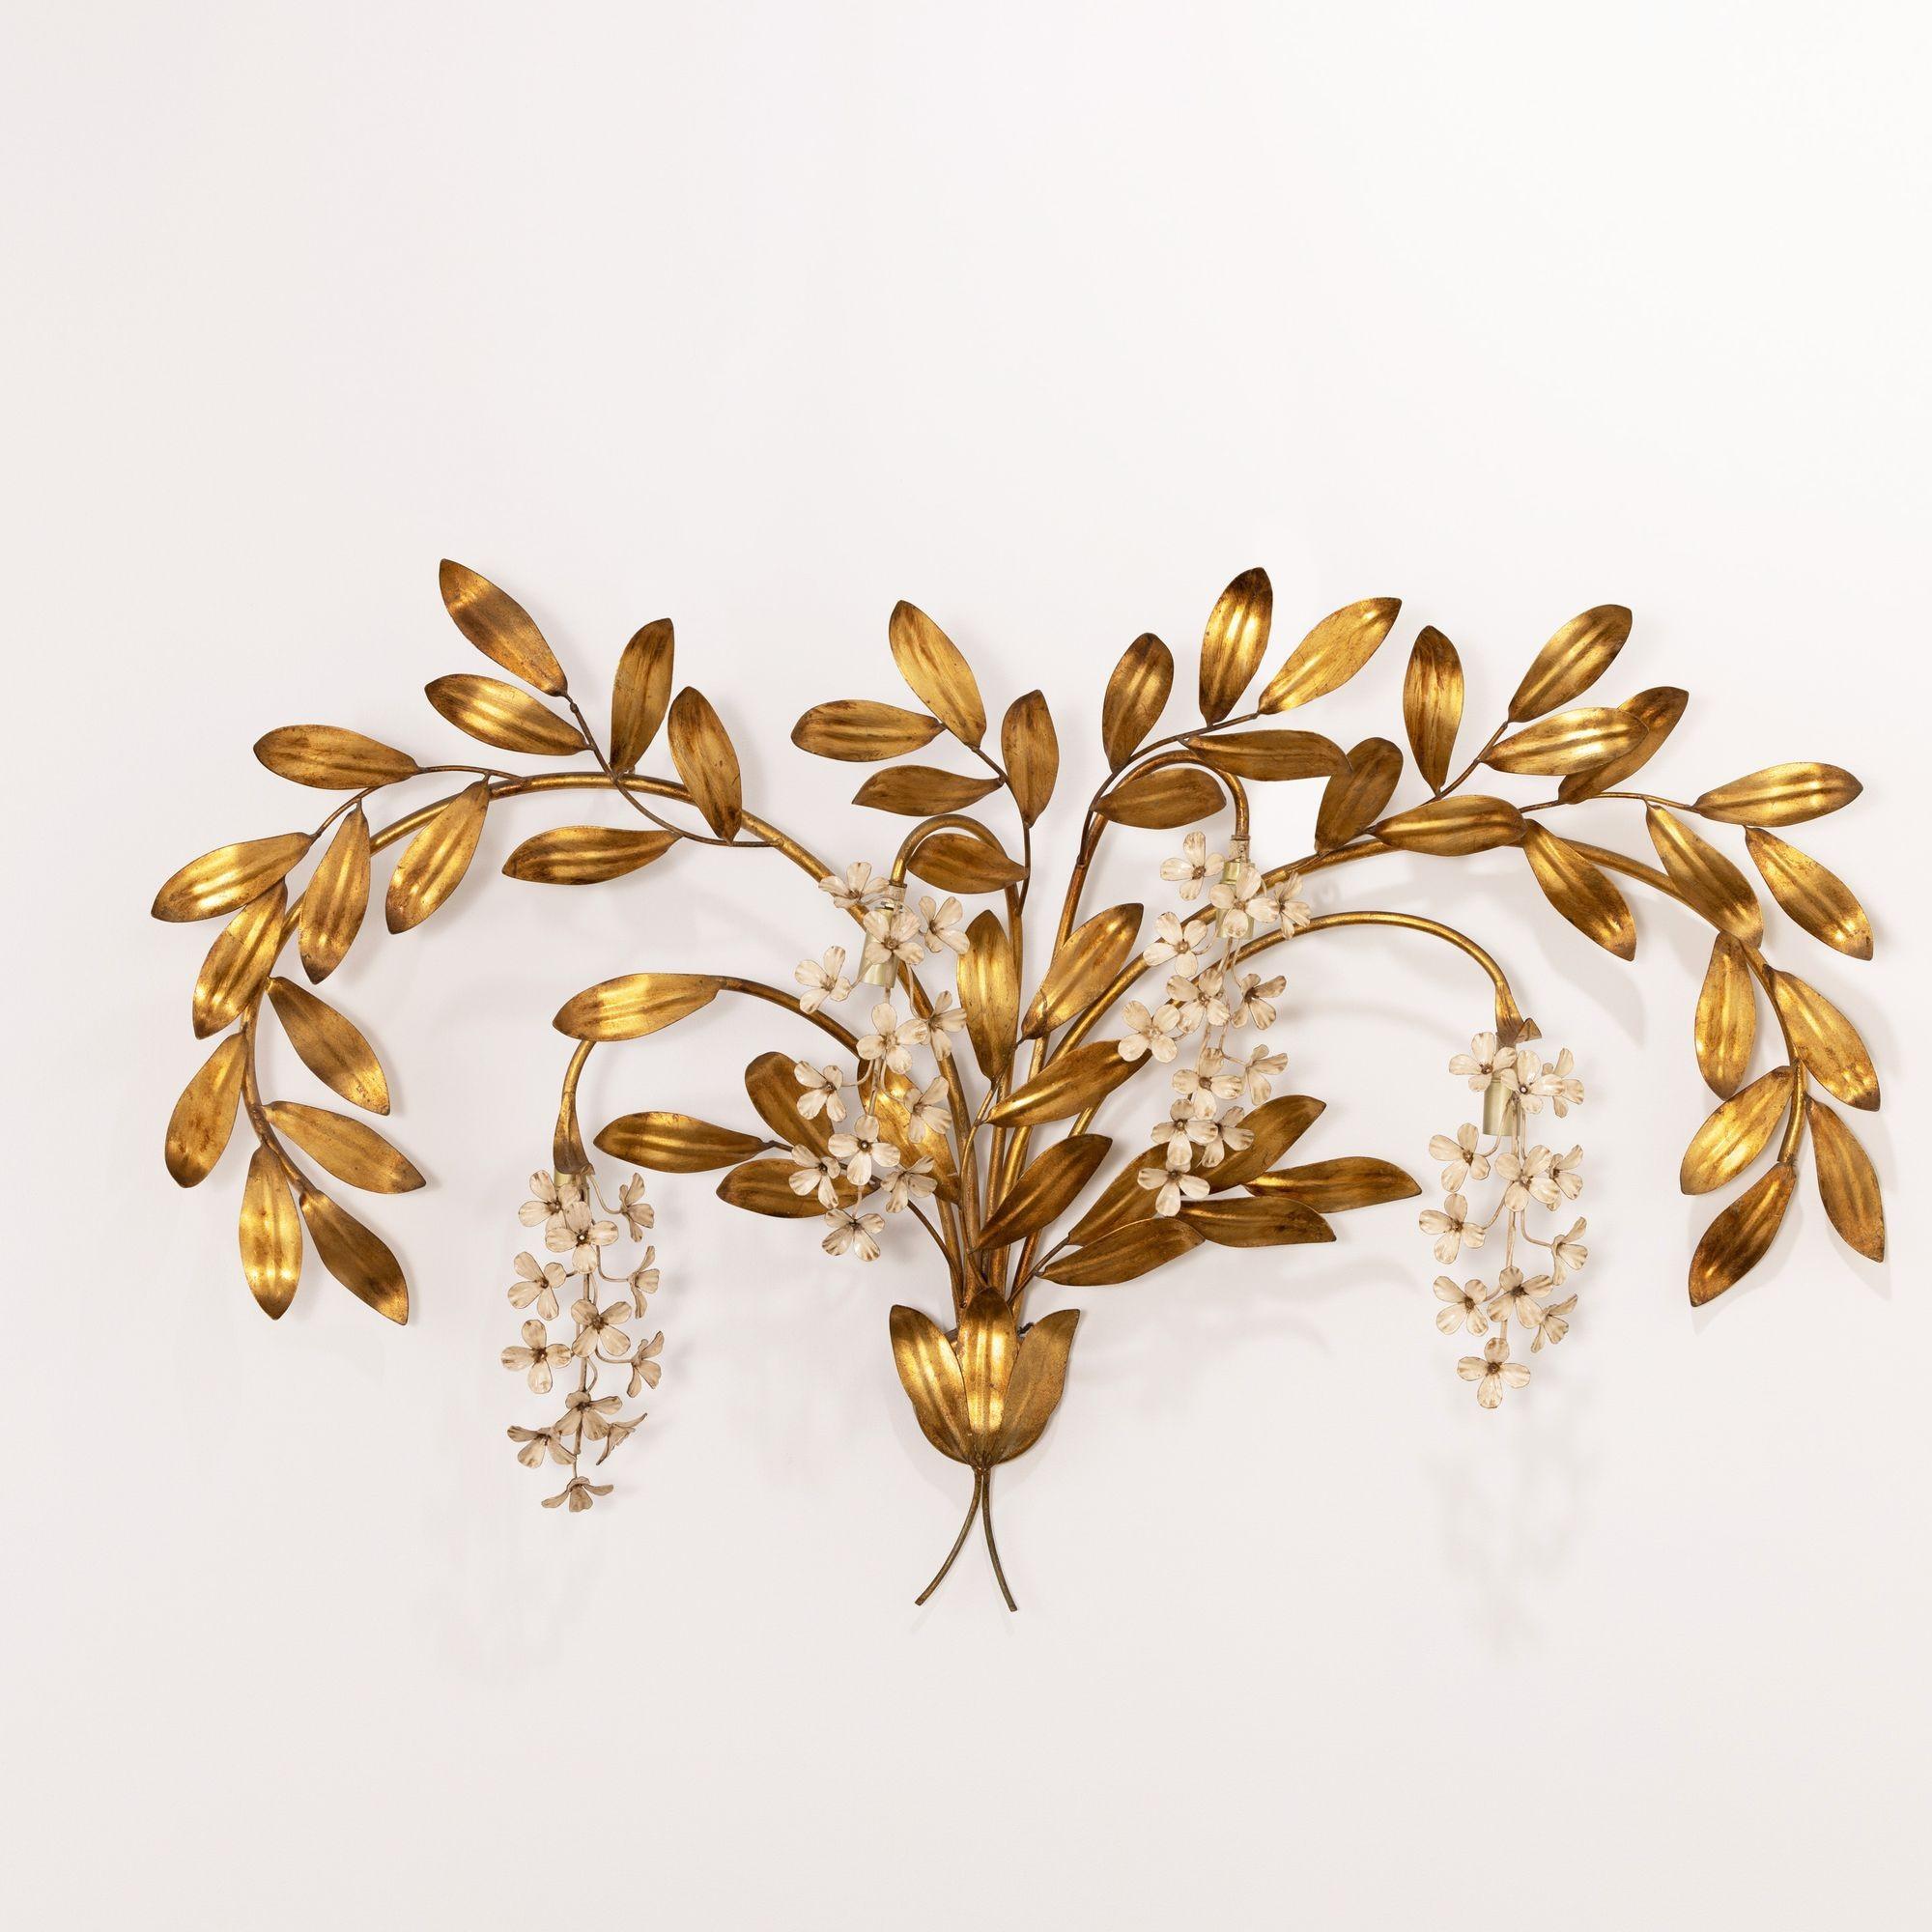 Large Hollywood Regency style 'Wisteria' wall sconce appliqué by Hans Kögl, attributed to Jean-Henri Jansen, circa 1950-70, Germany.  Gold leaf and lacquered metal.  U.S. wired and in working condition. 125 volt. Takes (4) E12 bulbs up to 75 watts.  